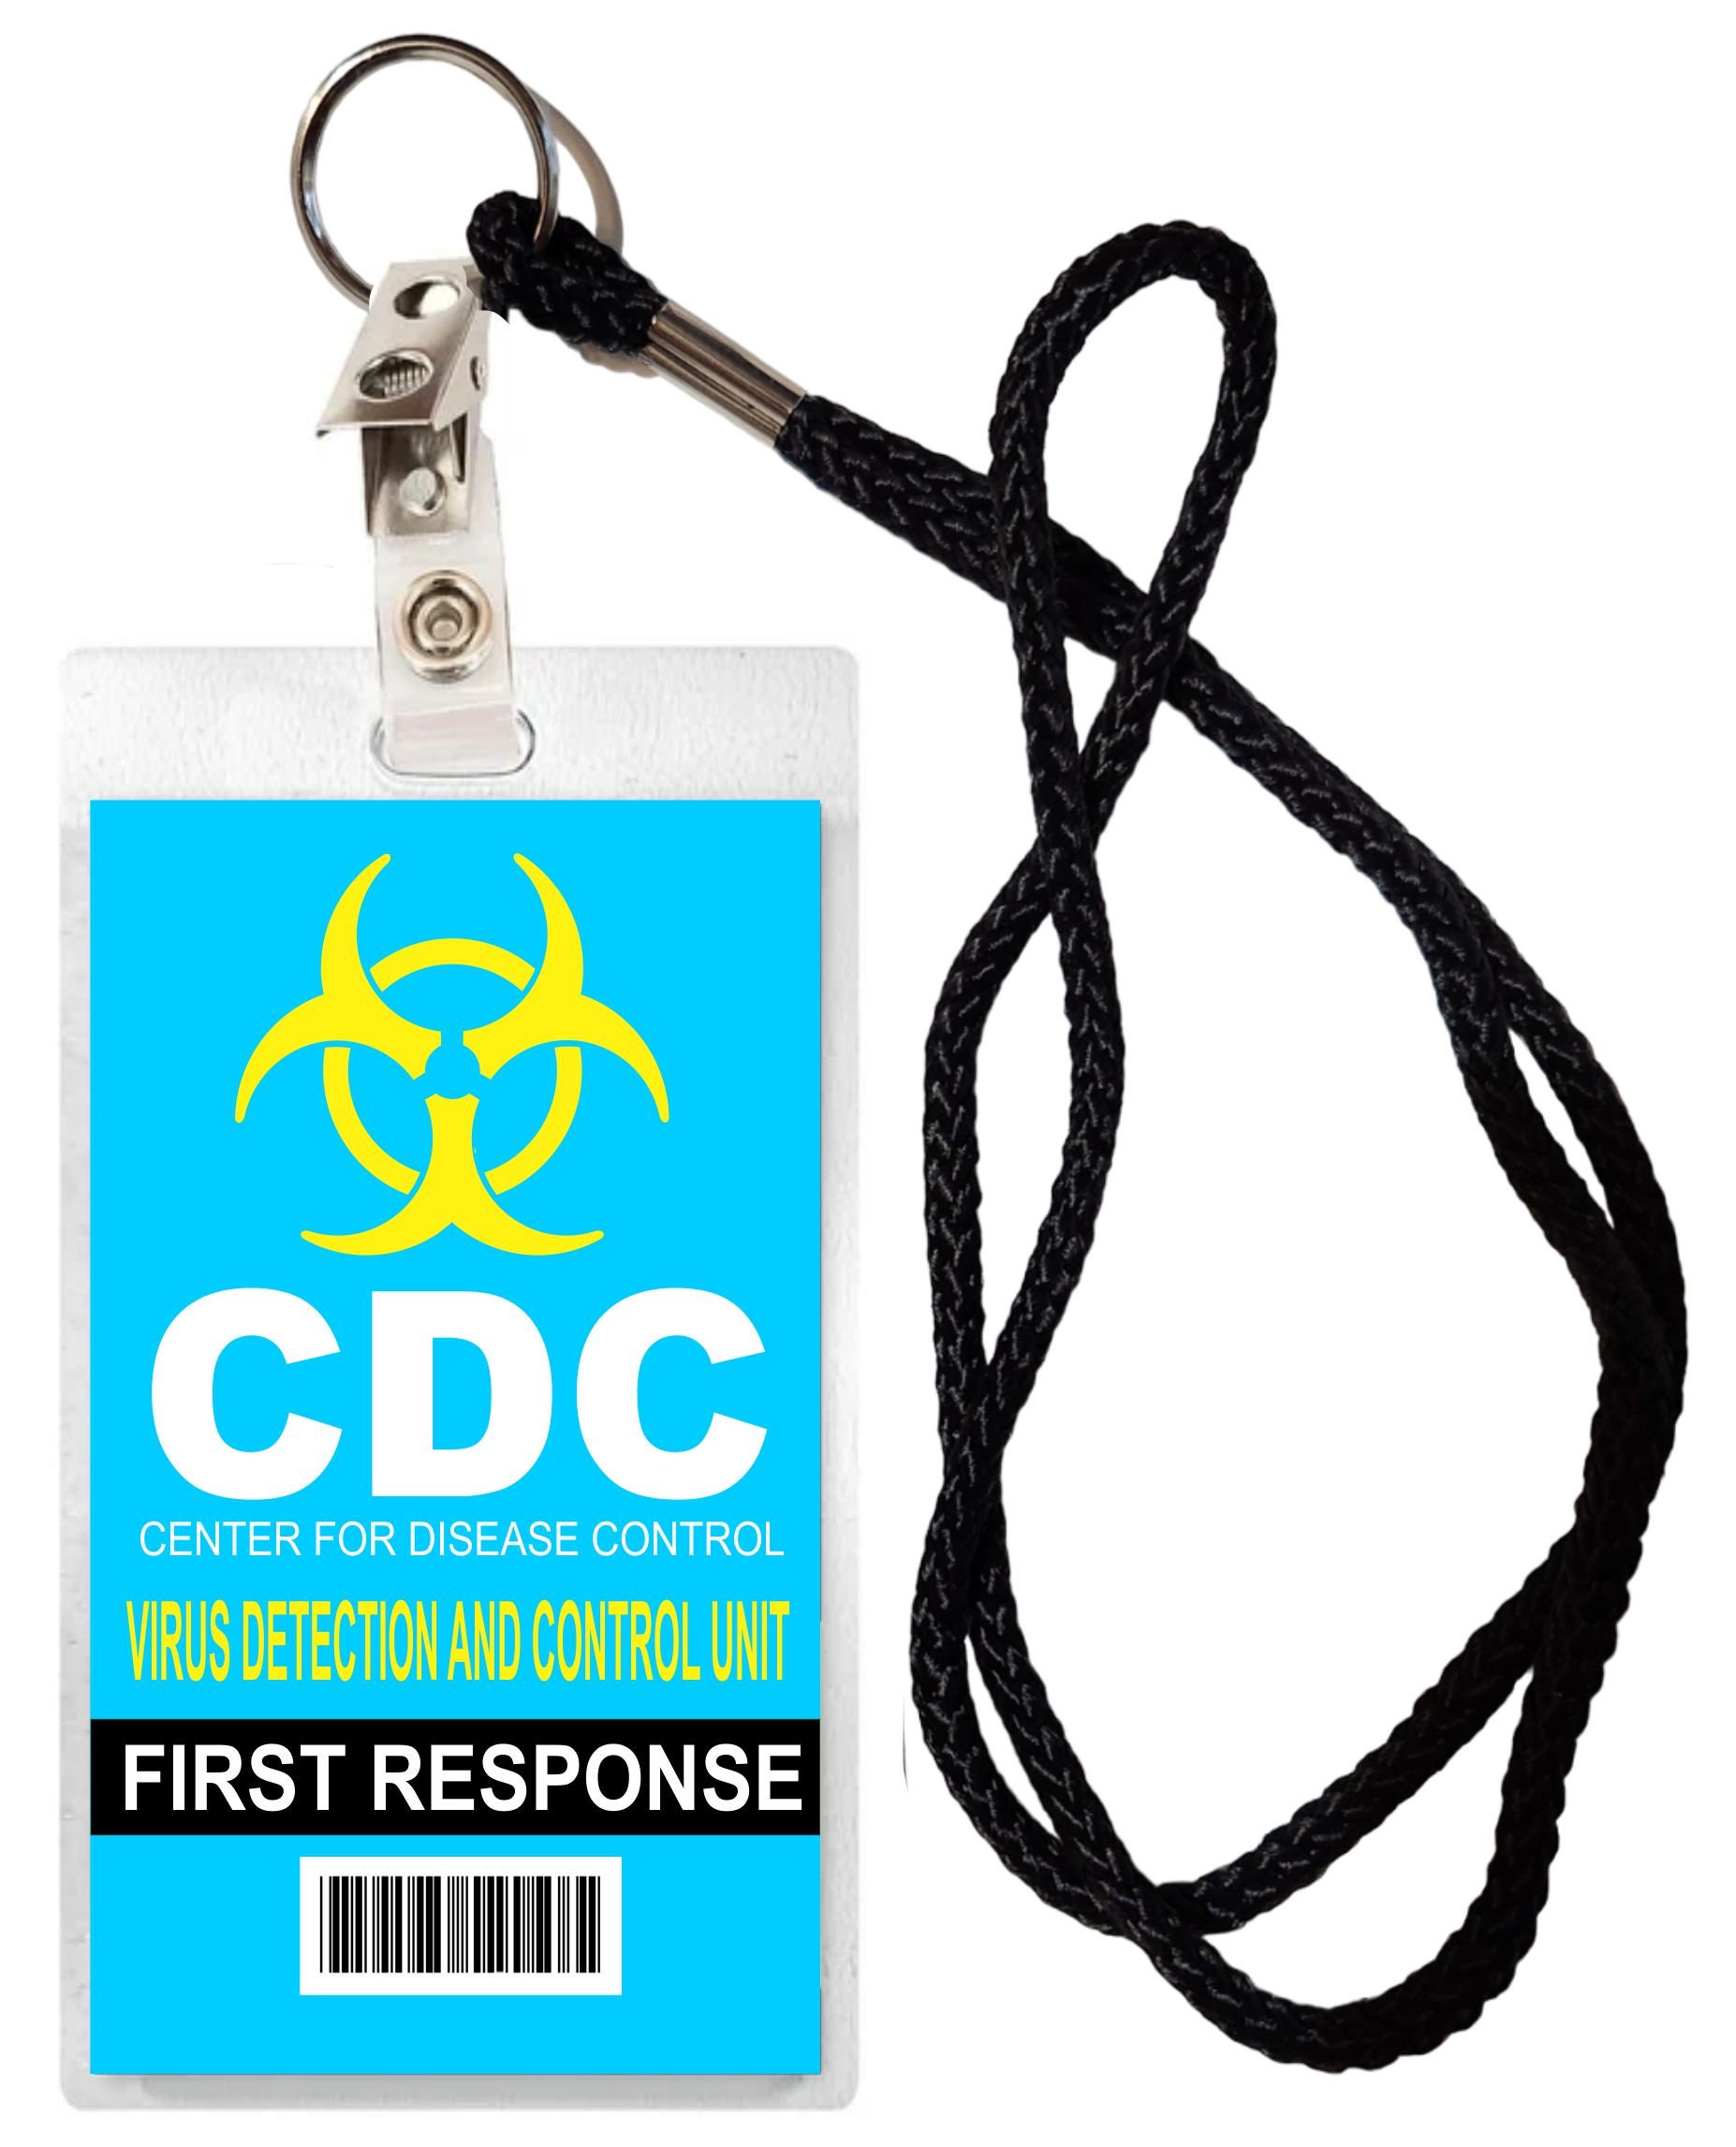 CL-008 CDC Metal ID Reel Retractable ID Card Holder